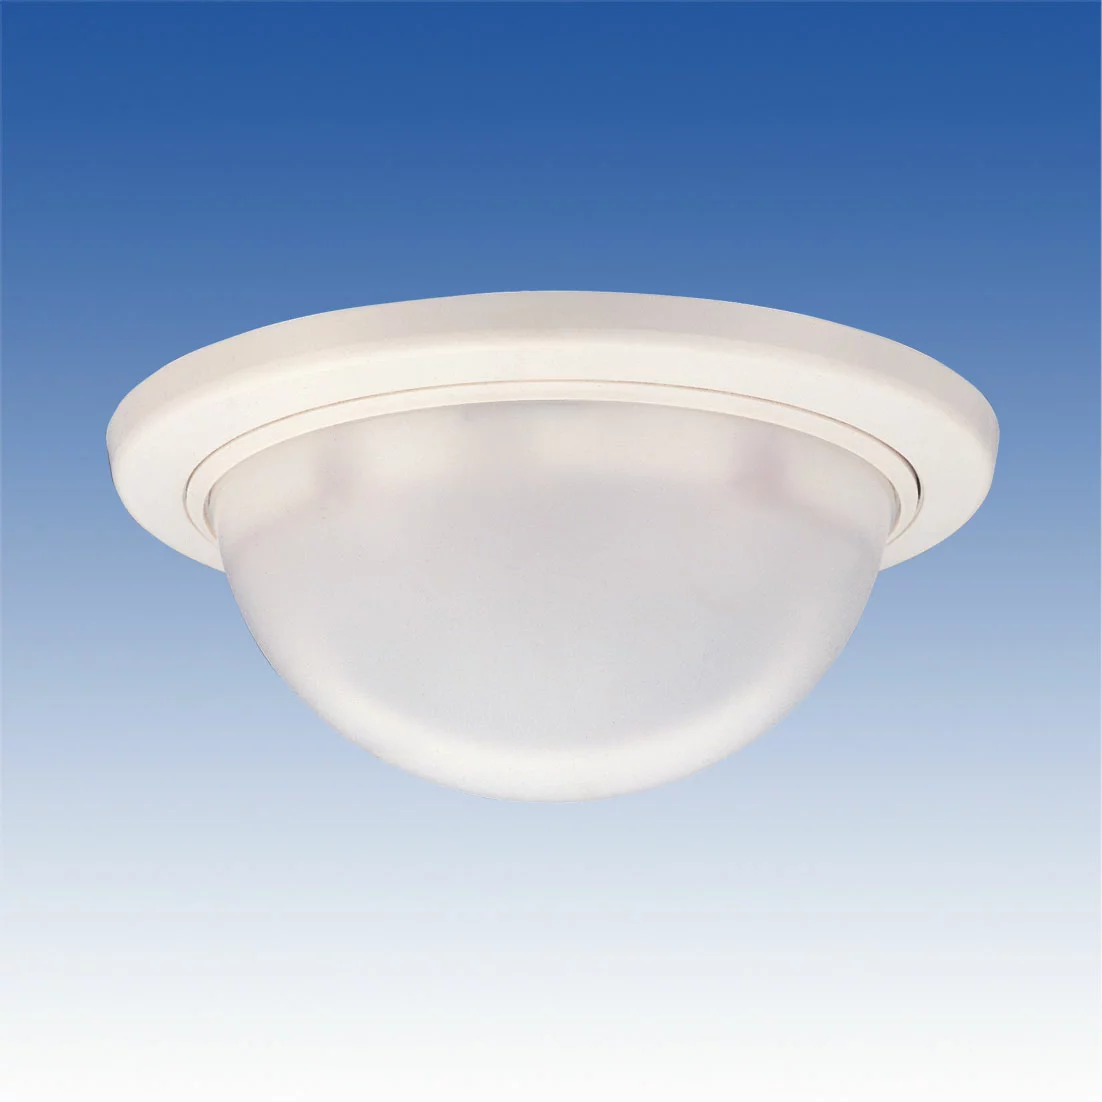 Takex 12M Ceiling Wide Angle Snap-In PIR PA-6812